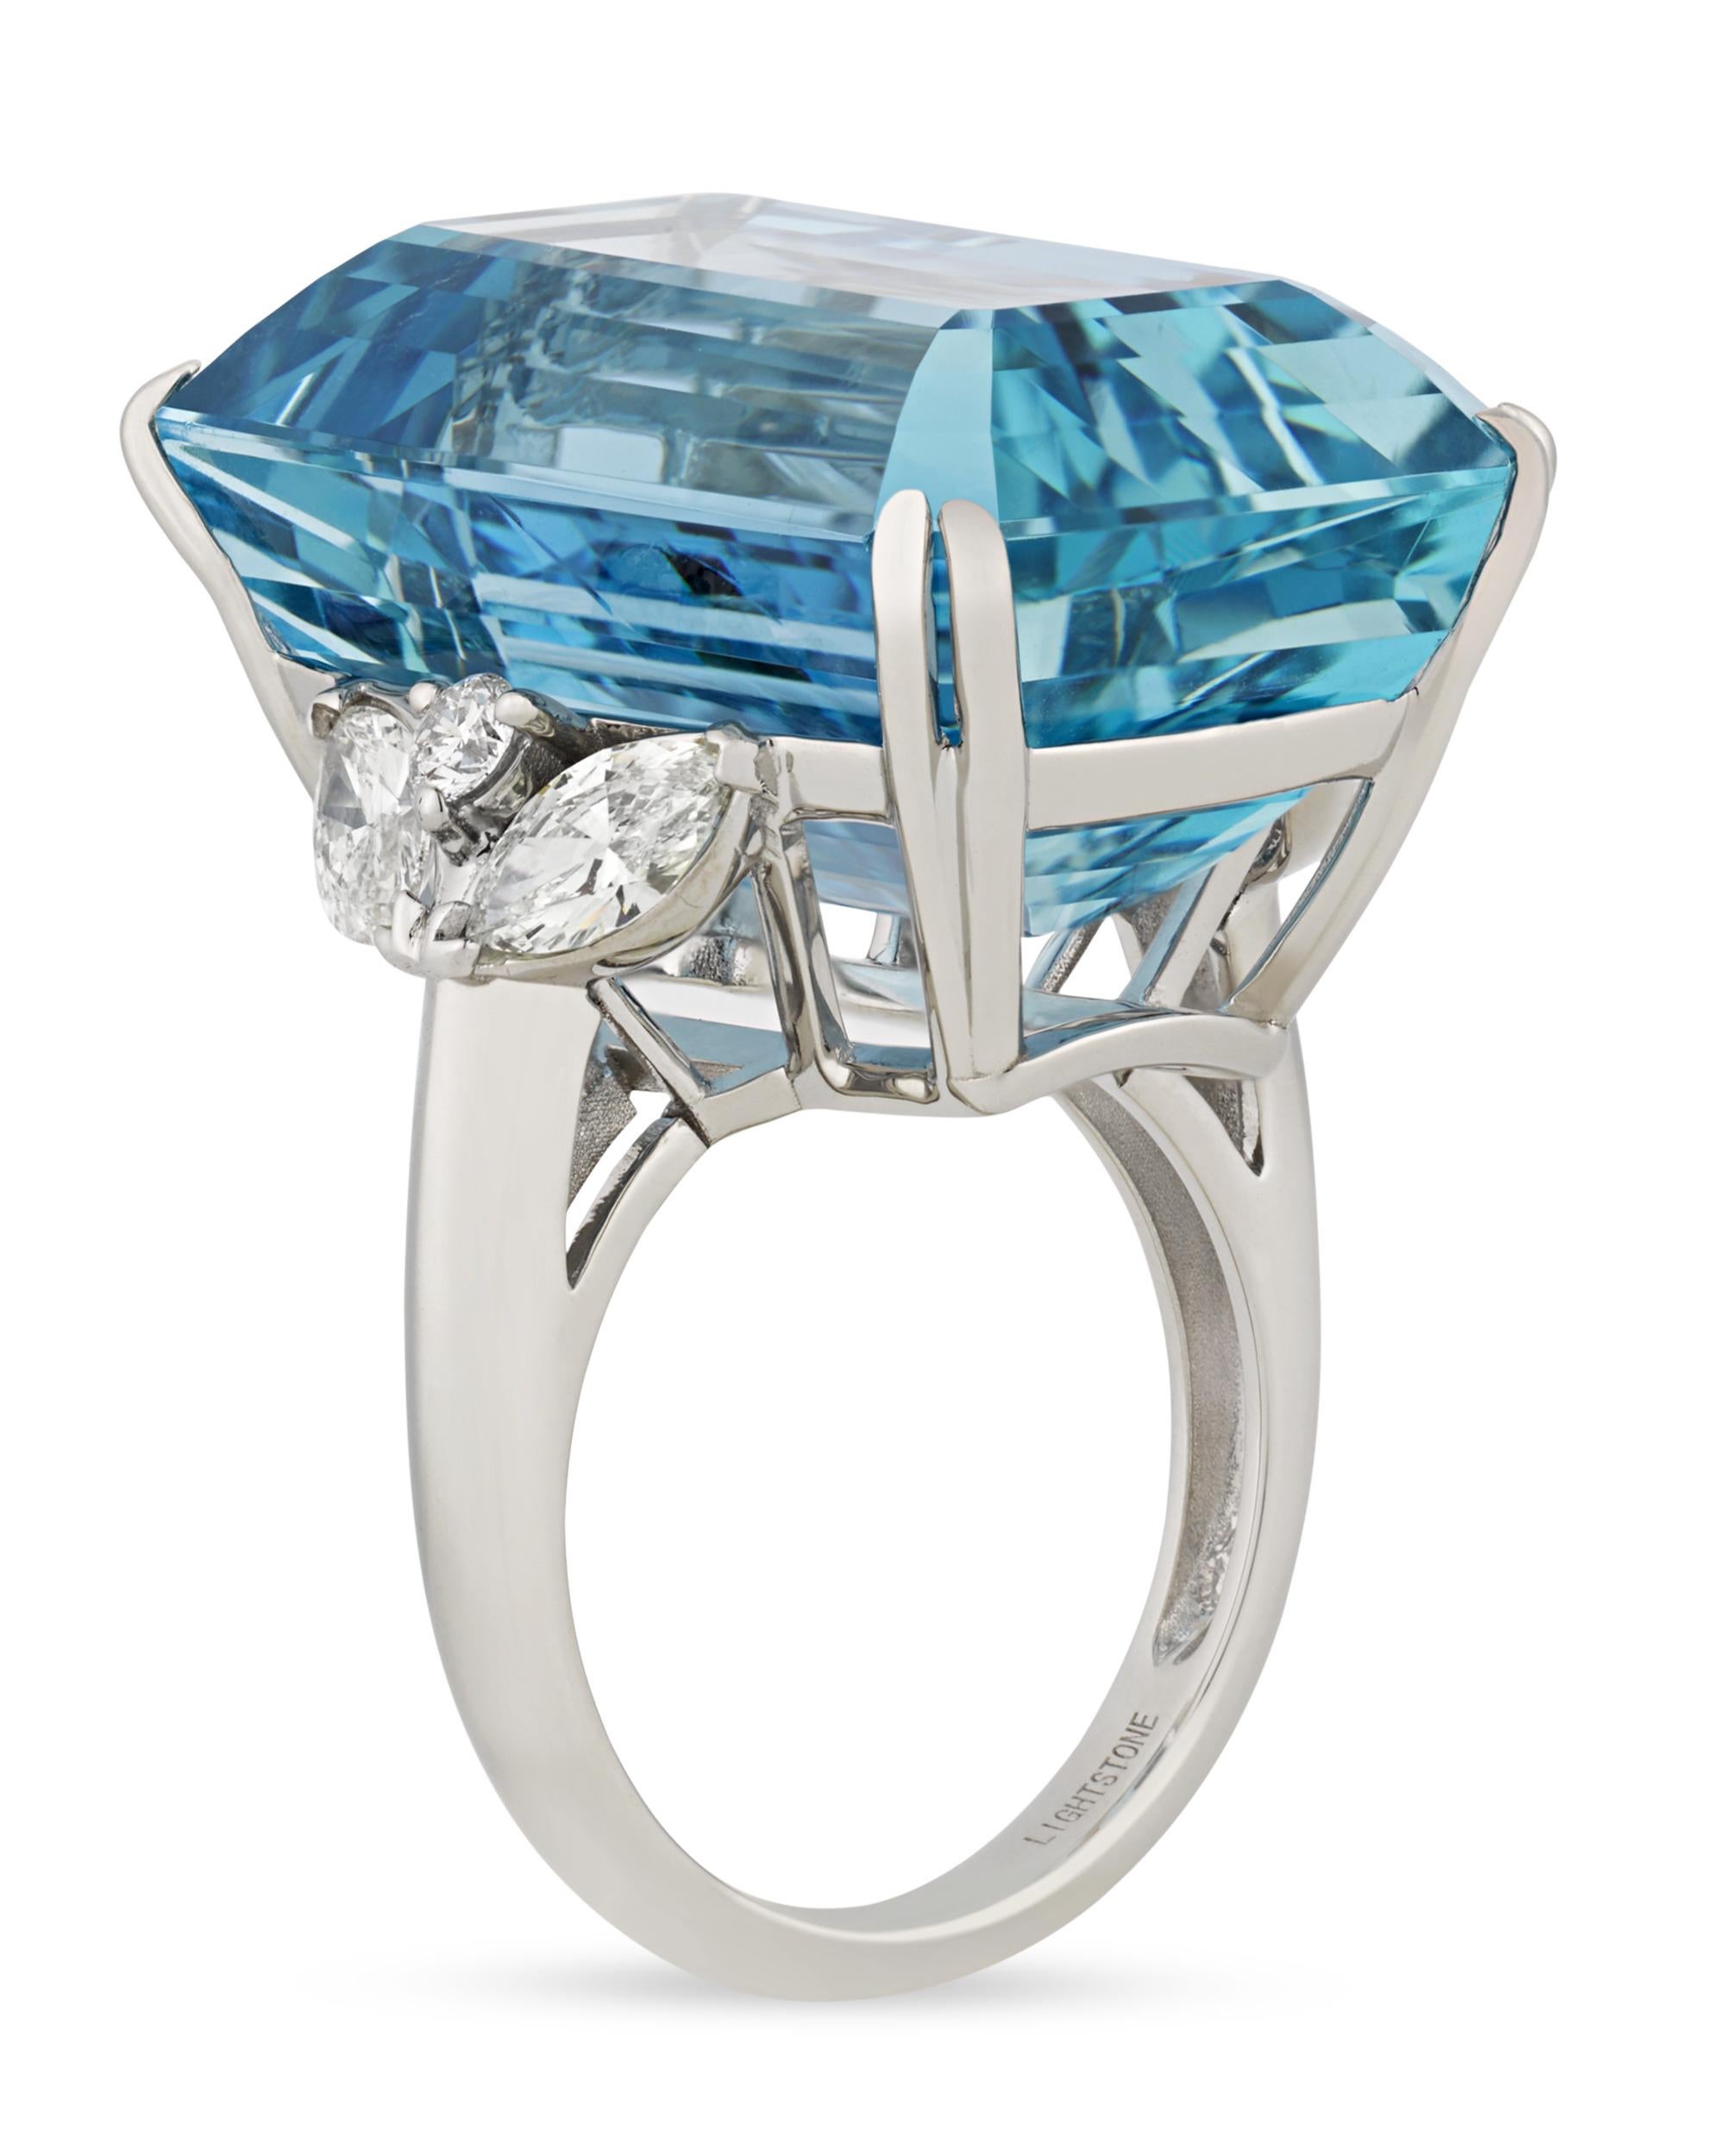 With the stunning blue hue of a clear tropical ocean, the incredible 43.37-carat emerald-cut aquamarine at the center of this ring is absolutely captivating. This specimen possesses the deeply saturated Santa Maria blue hue that is found only in the